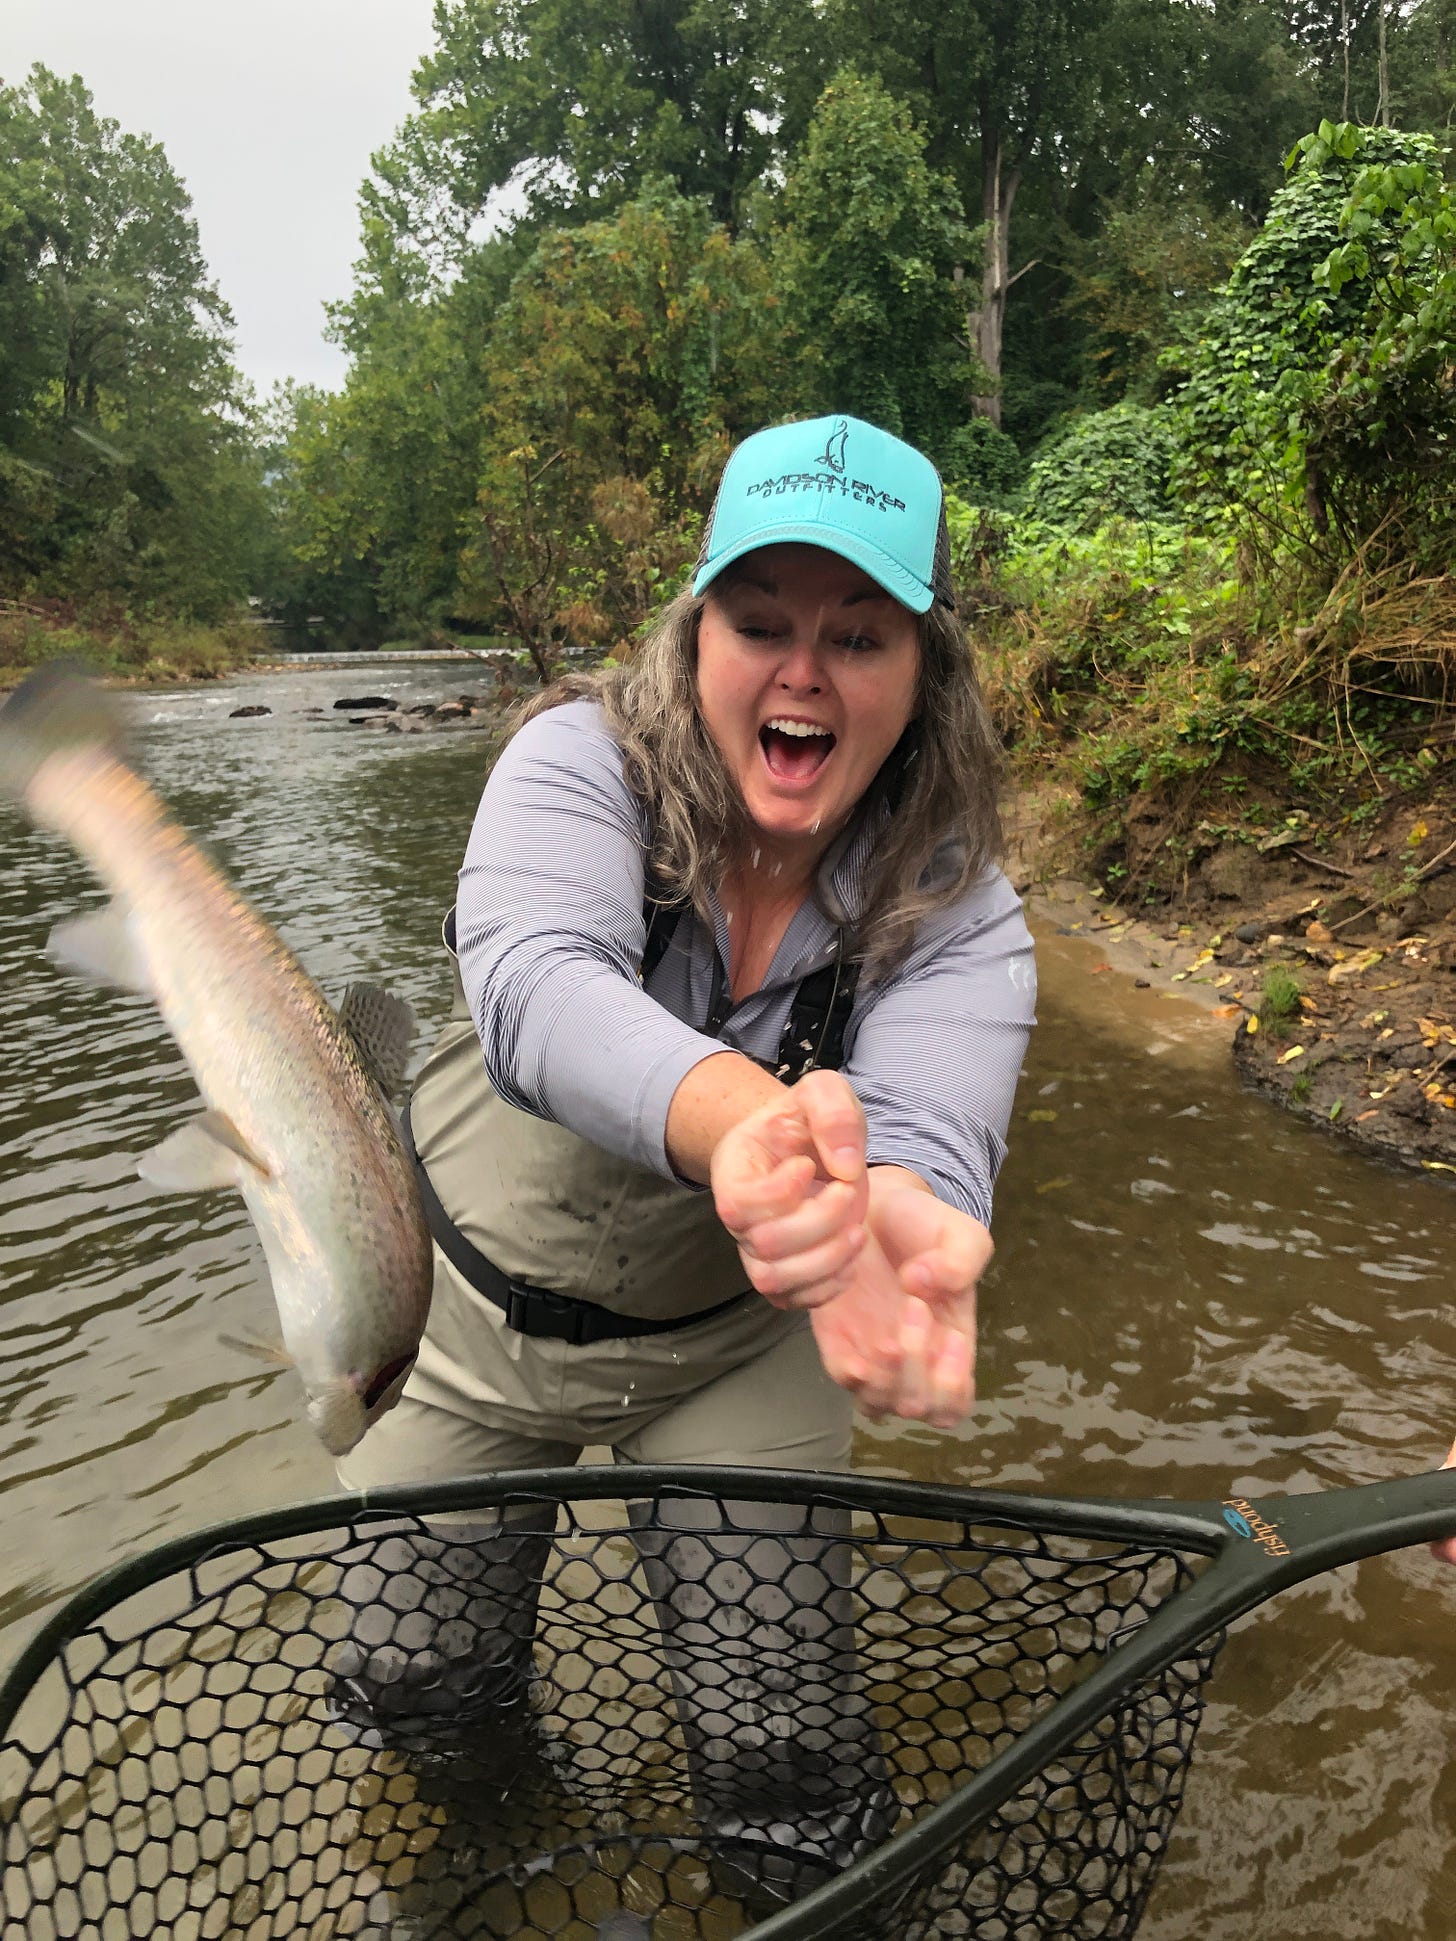 a woman fly fishing, losing her grip on the fish